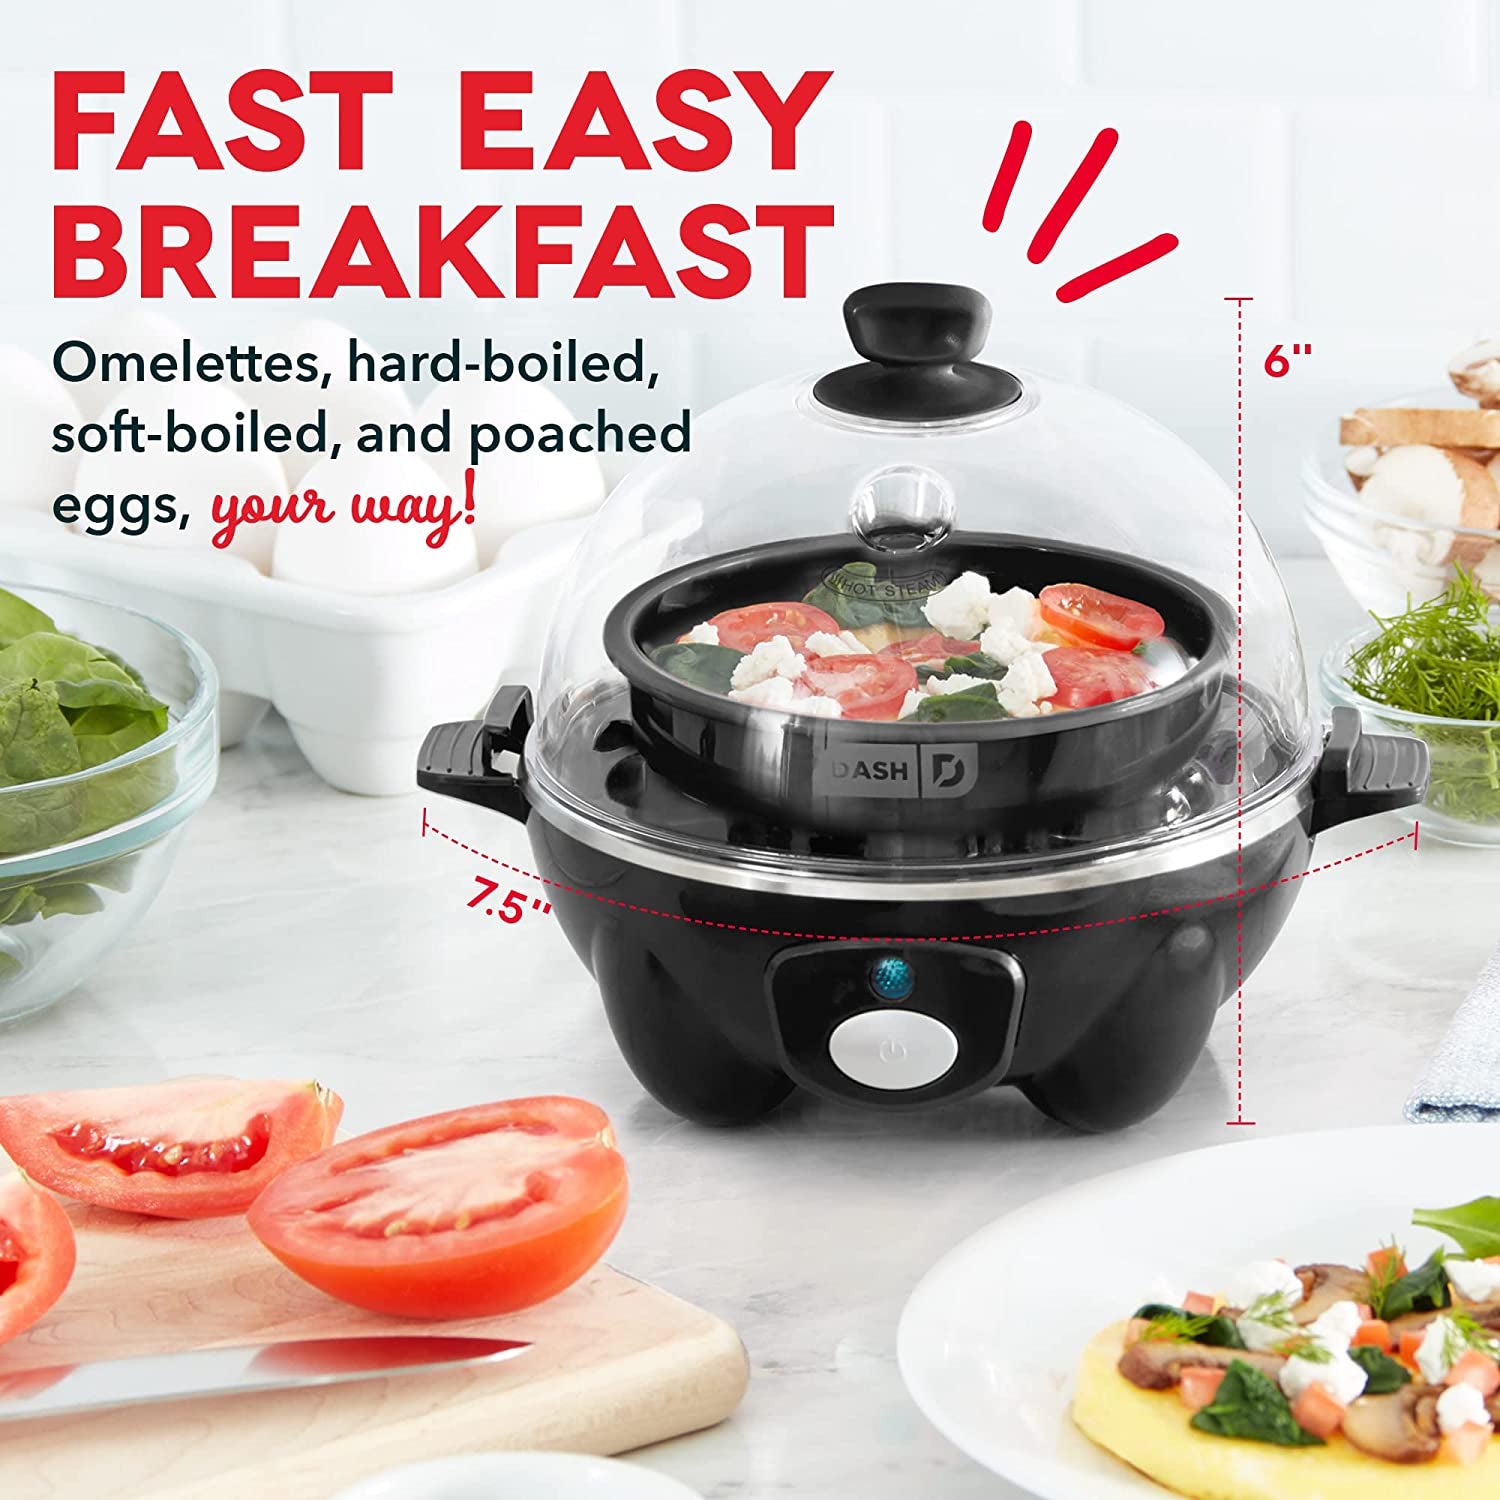 DASH Rapid Egg Cooker: Electric Cooker for Hard Boiled Eggs, Poached Eggs, Scrambled Eggs, or Omelets with Auto Shut off Feature (6 Egg Capacity)